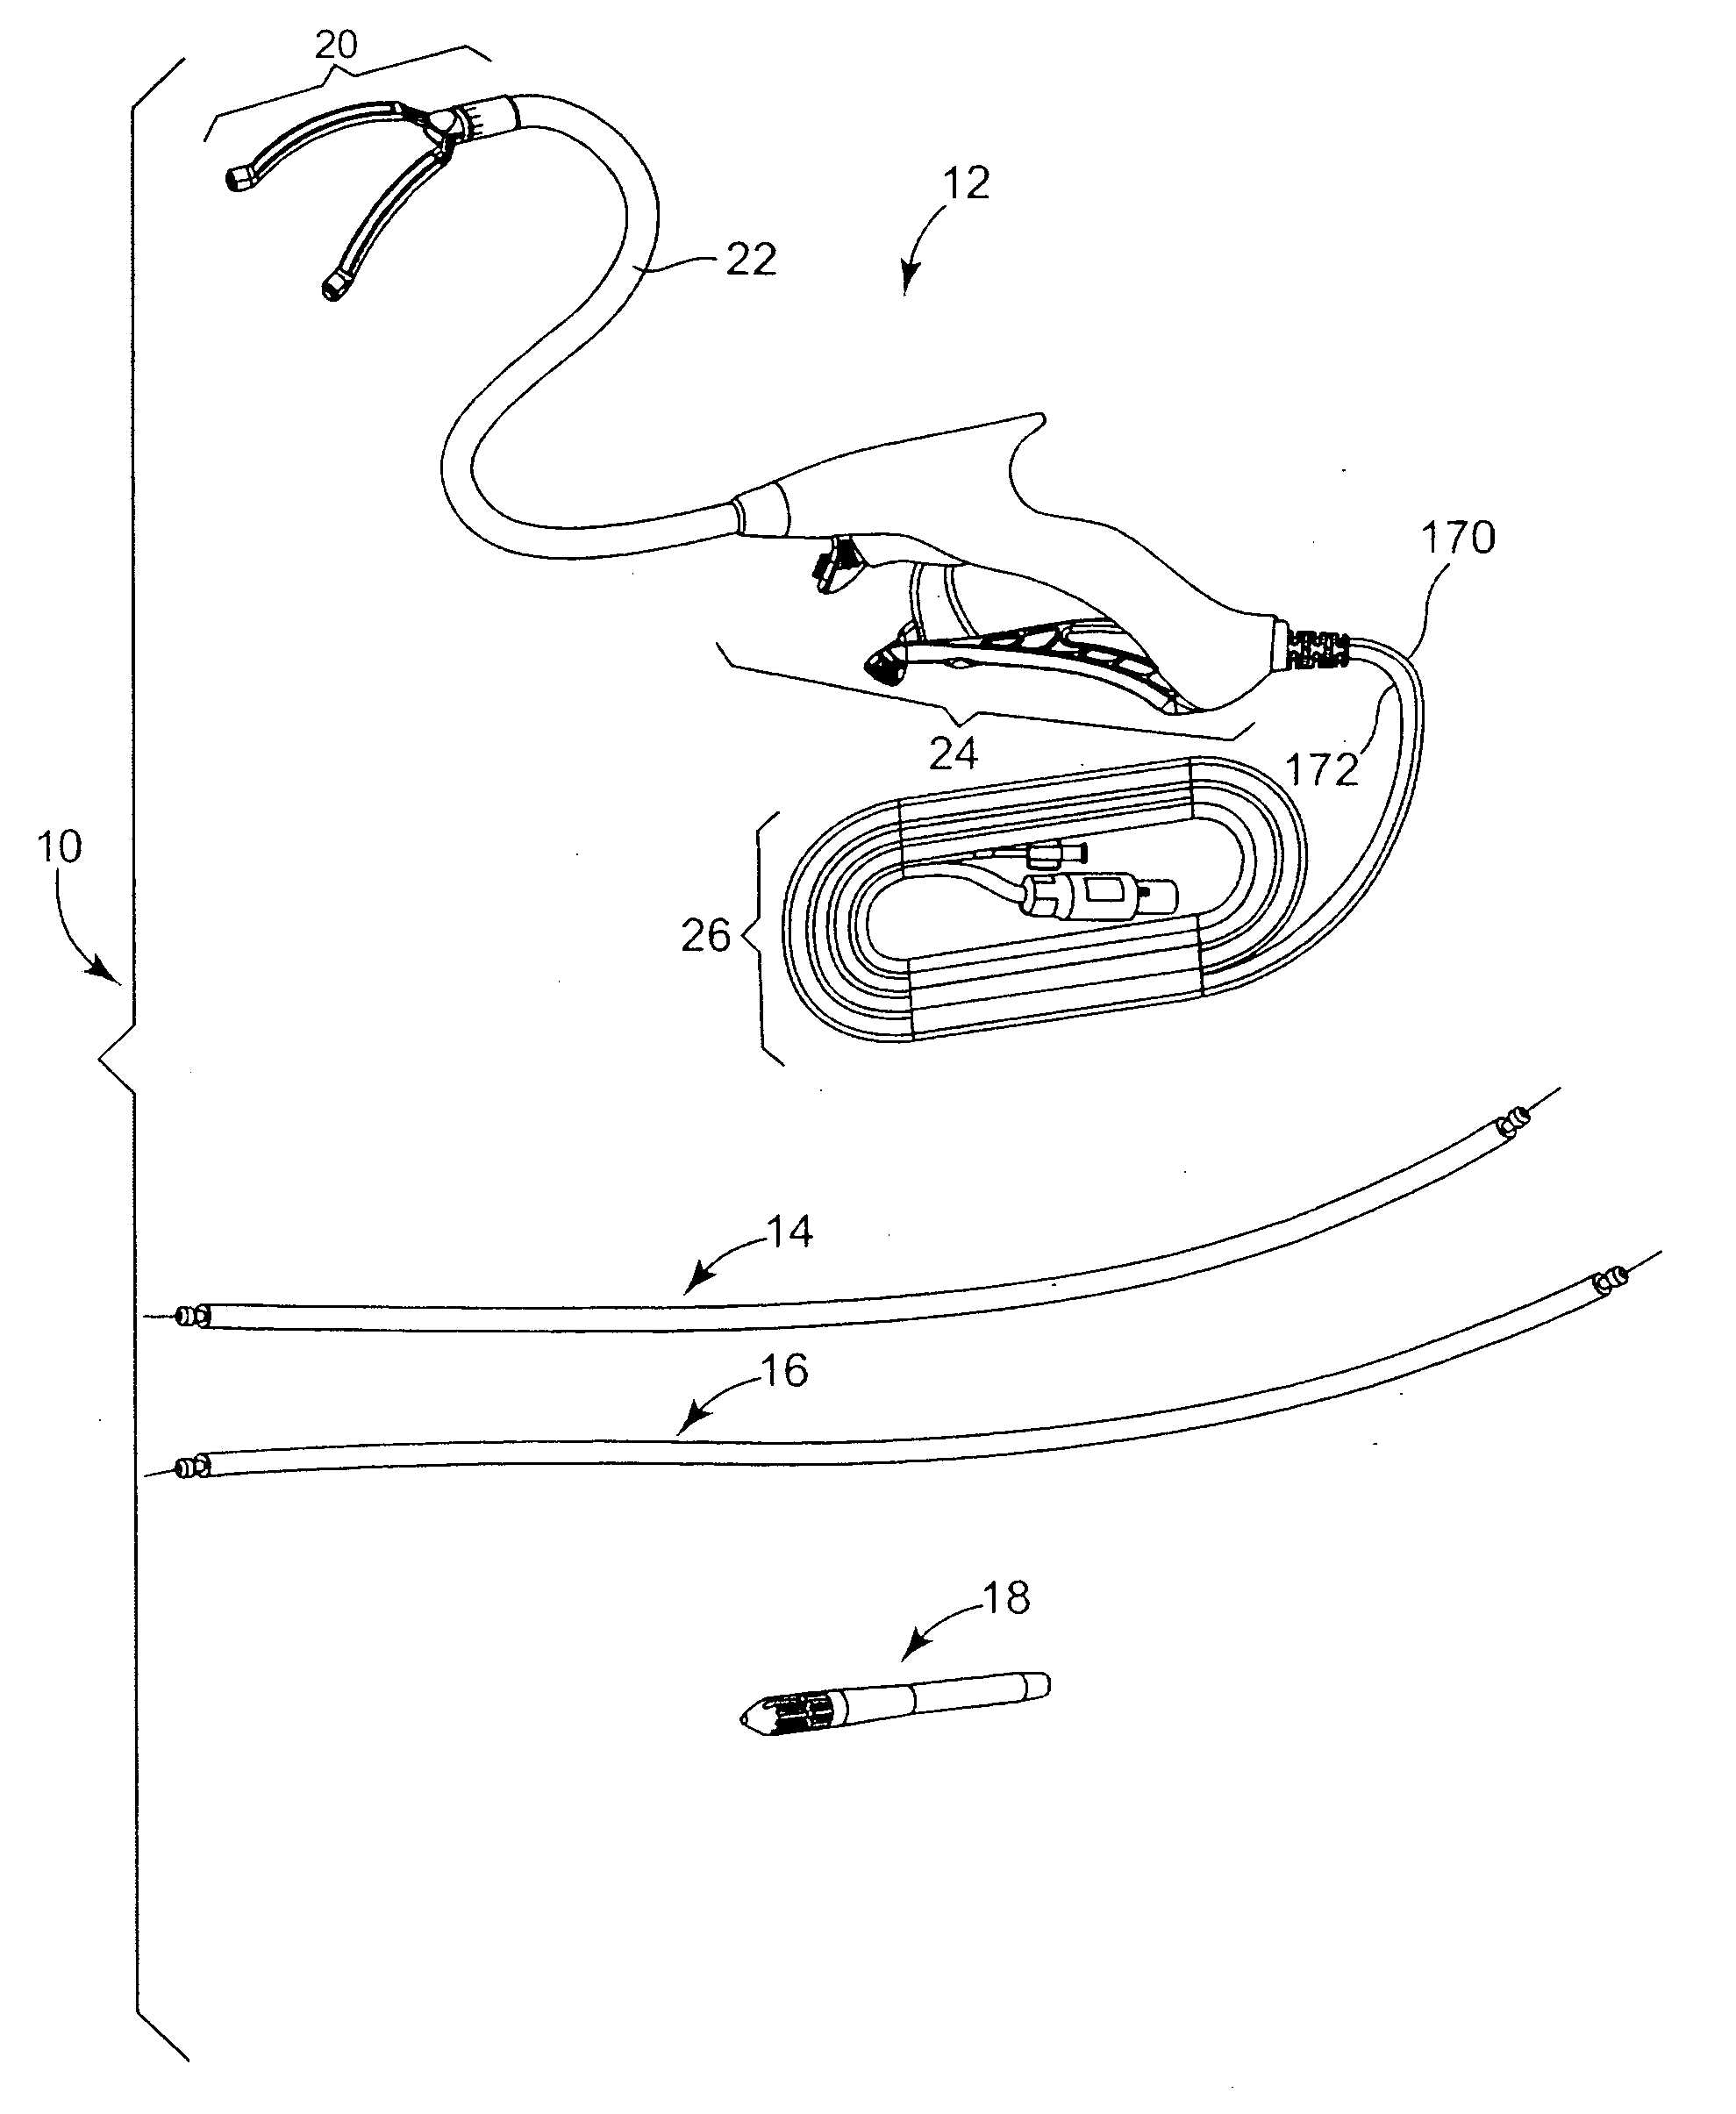 Ablation device with lockout feature